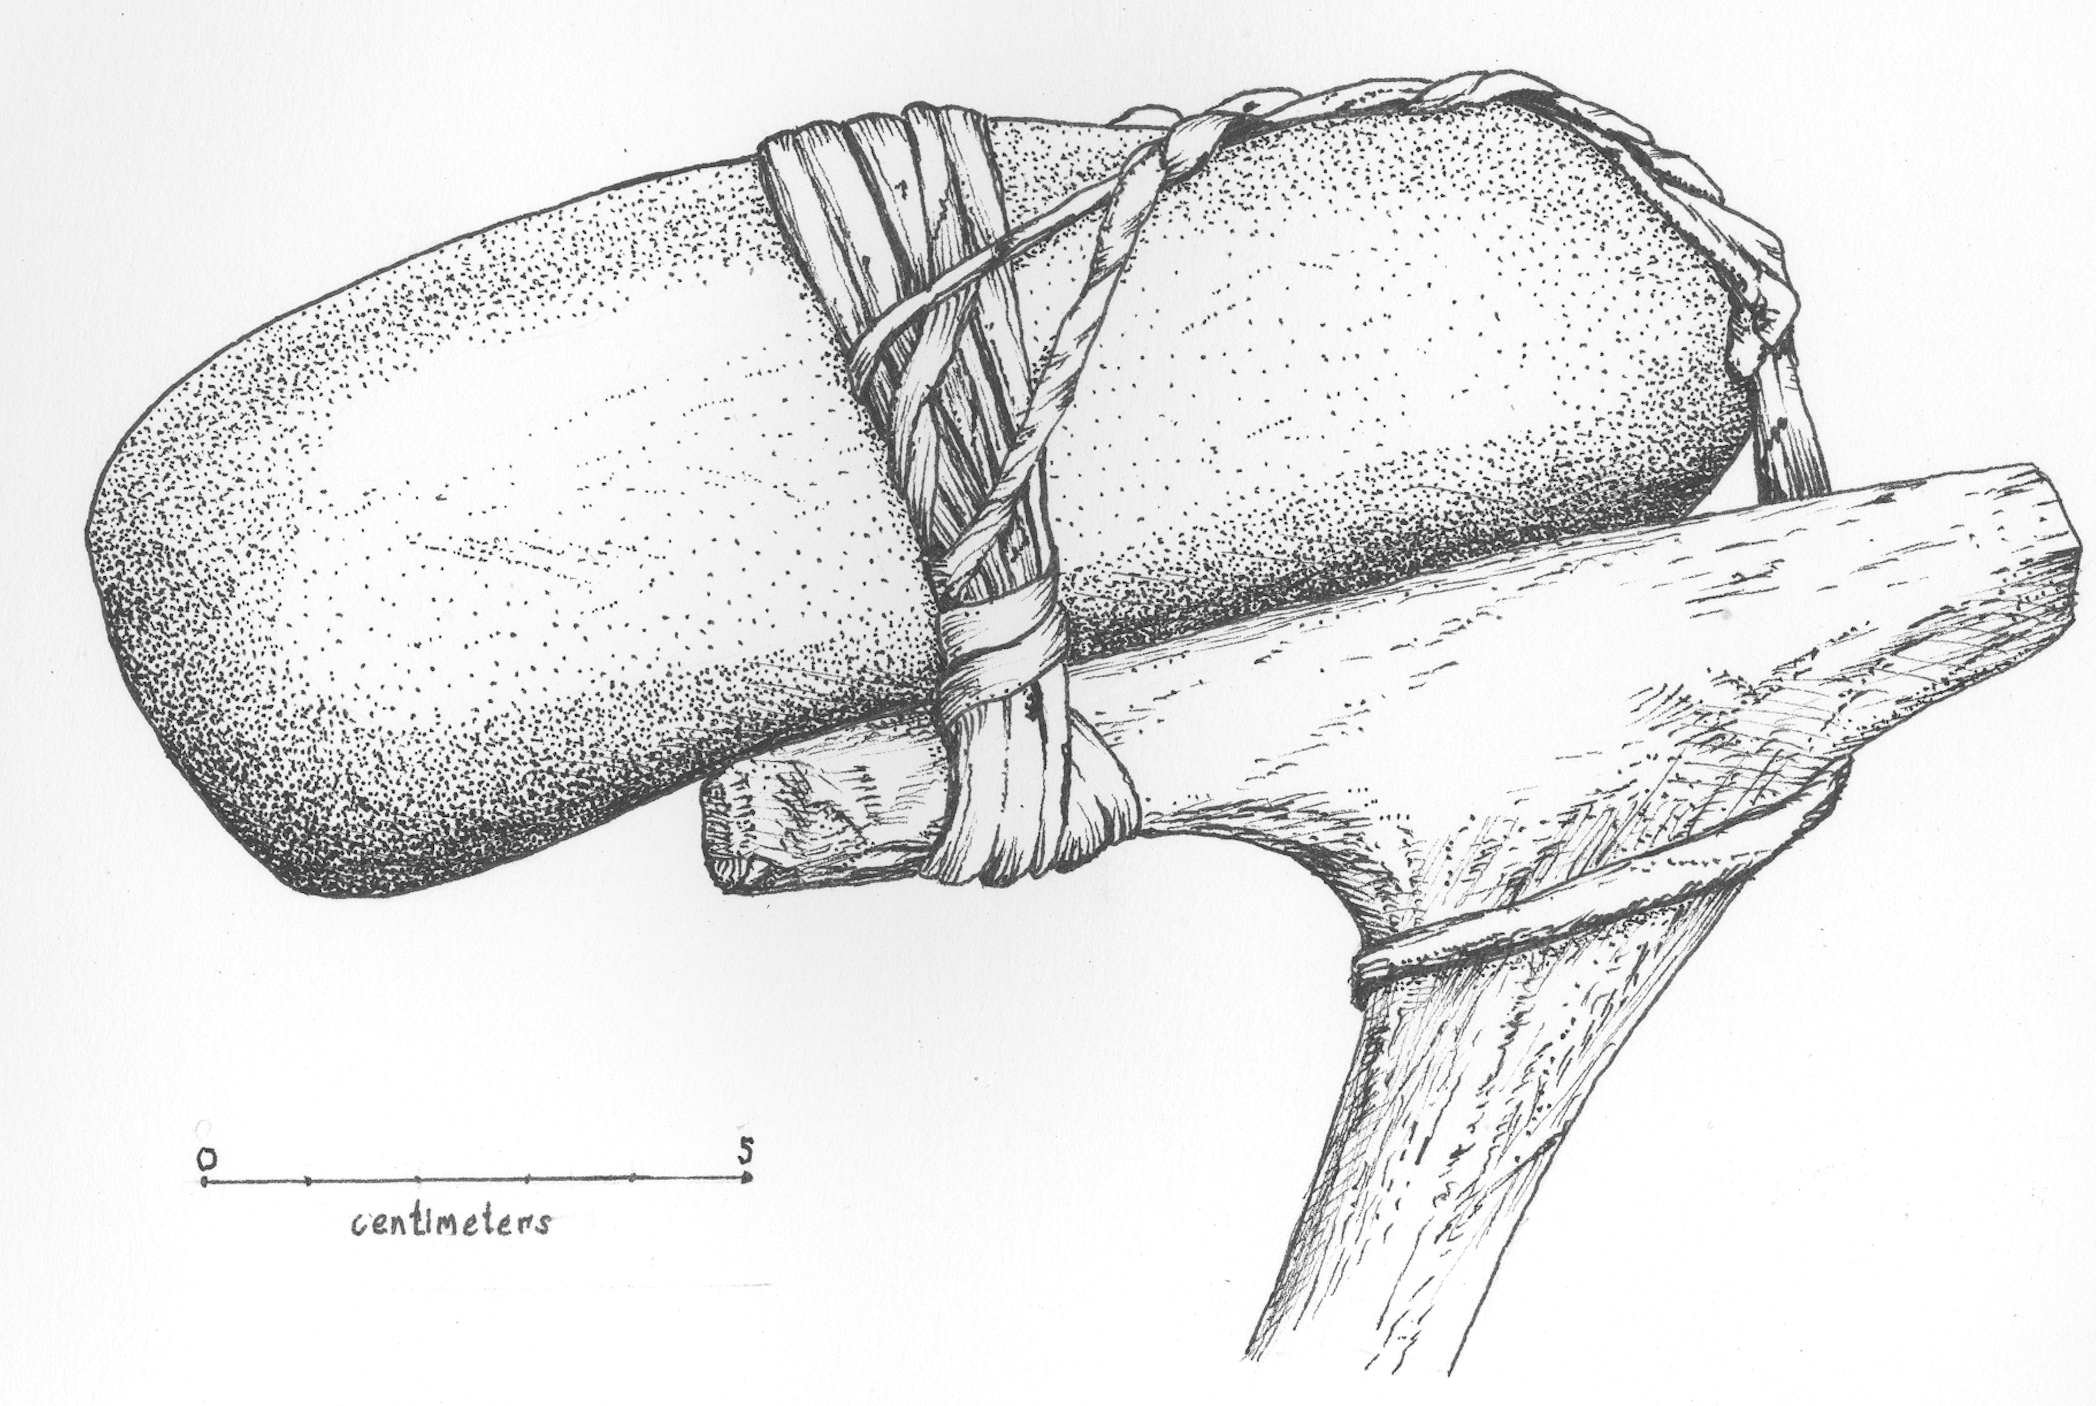 Heavy stones were lashed to antler or wood to make durable hammers